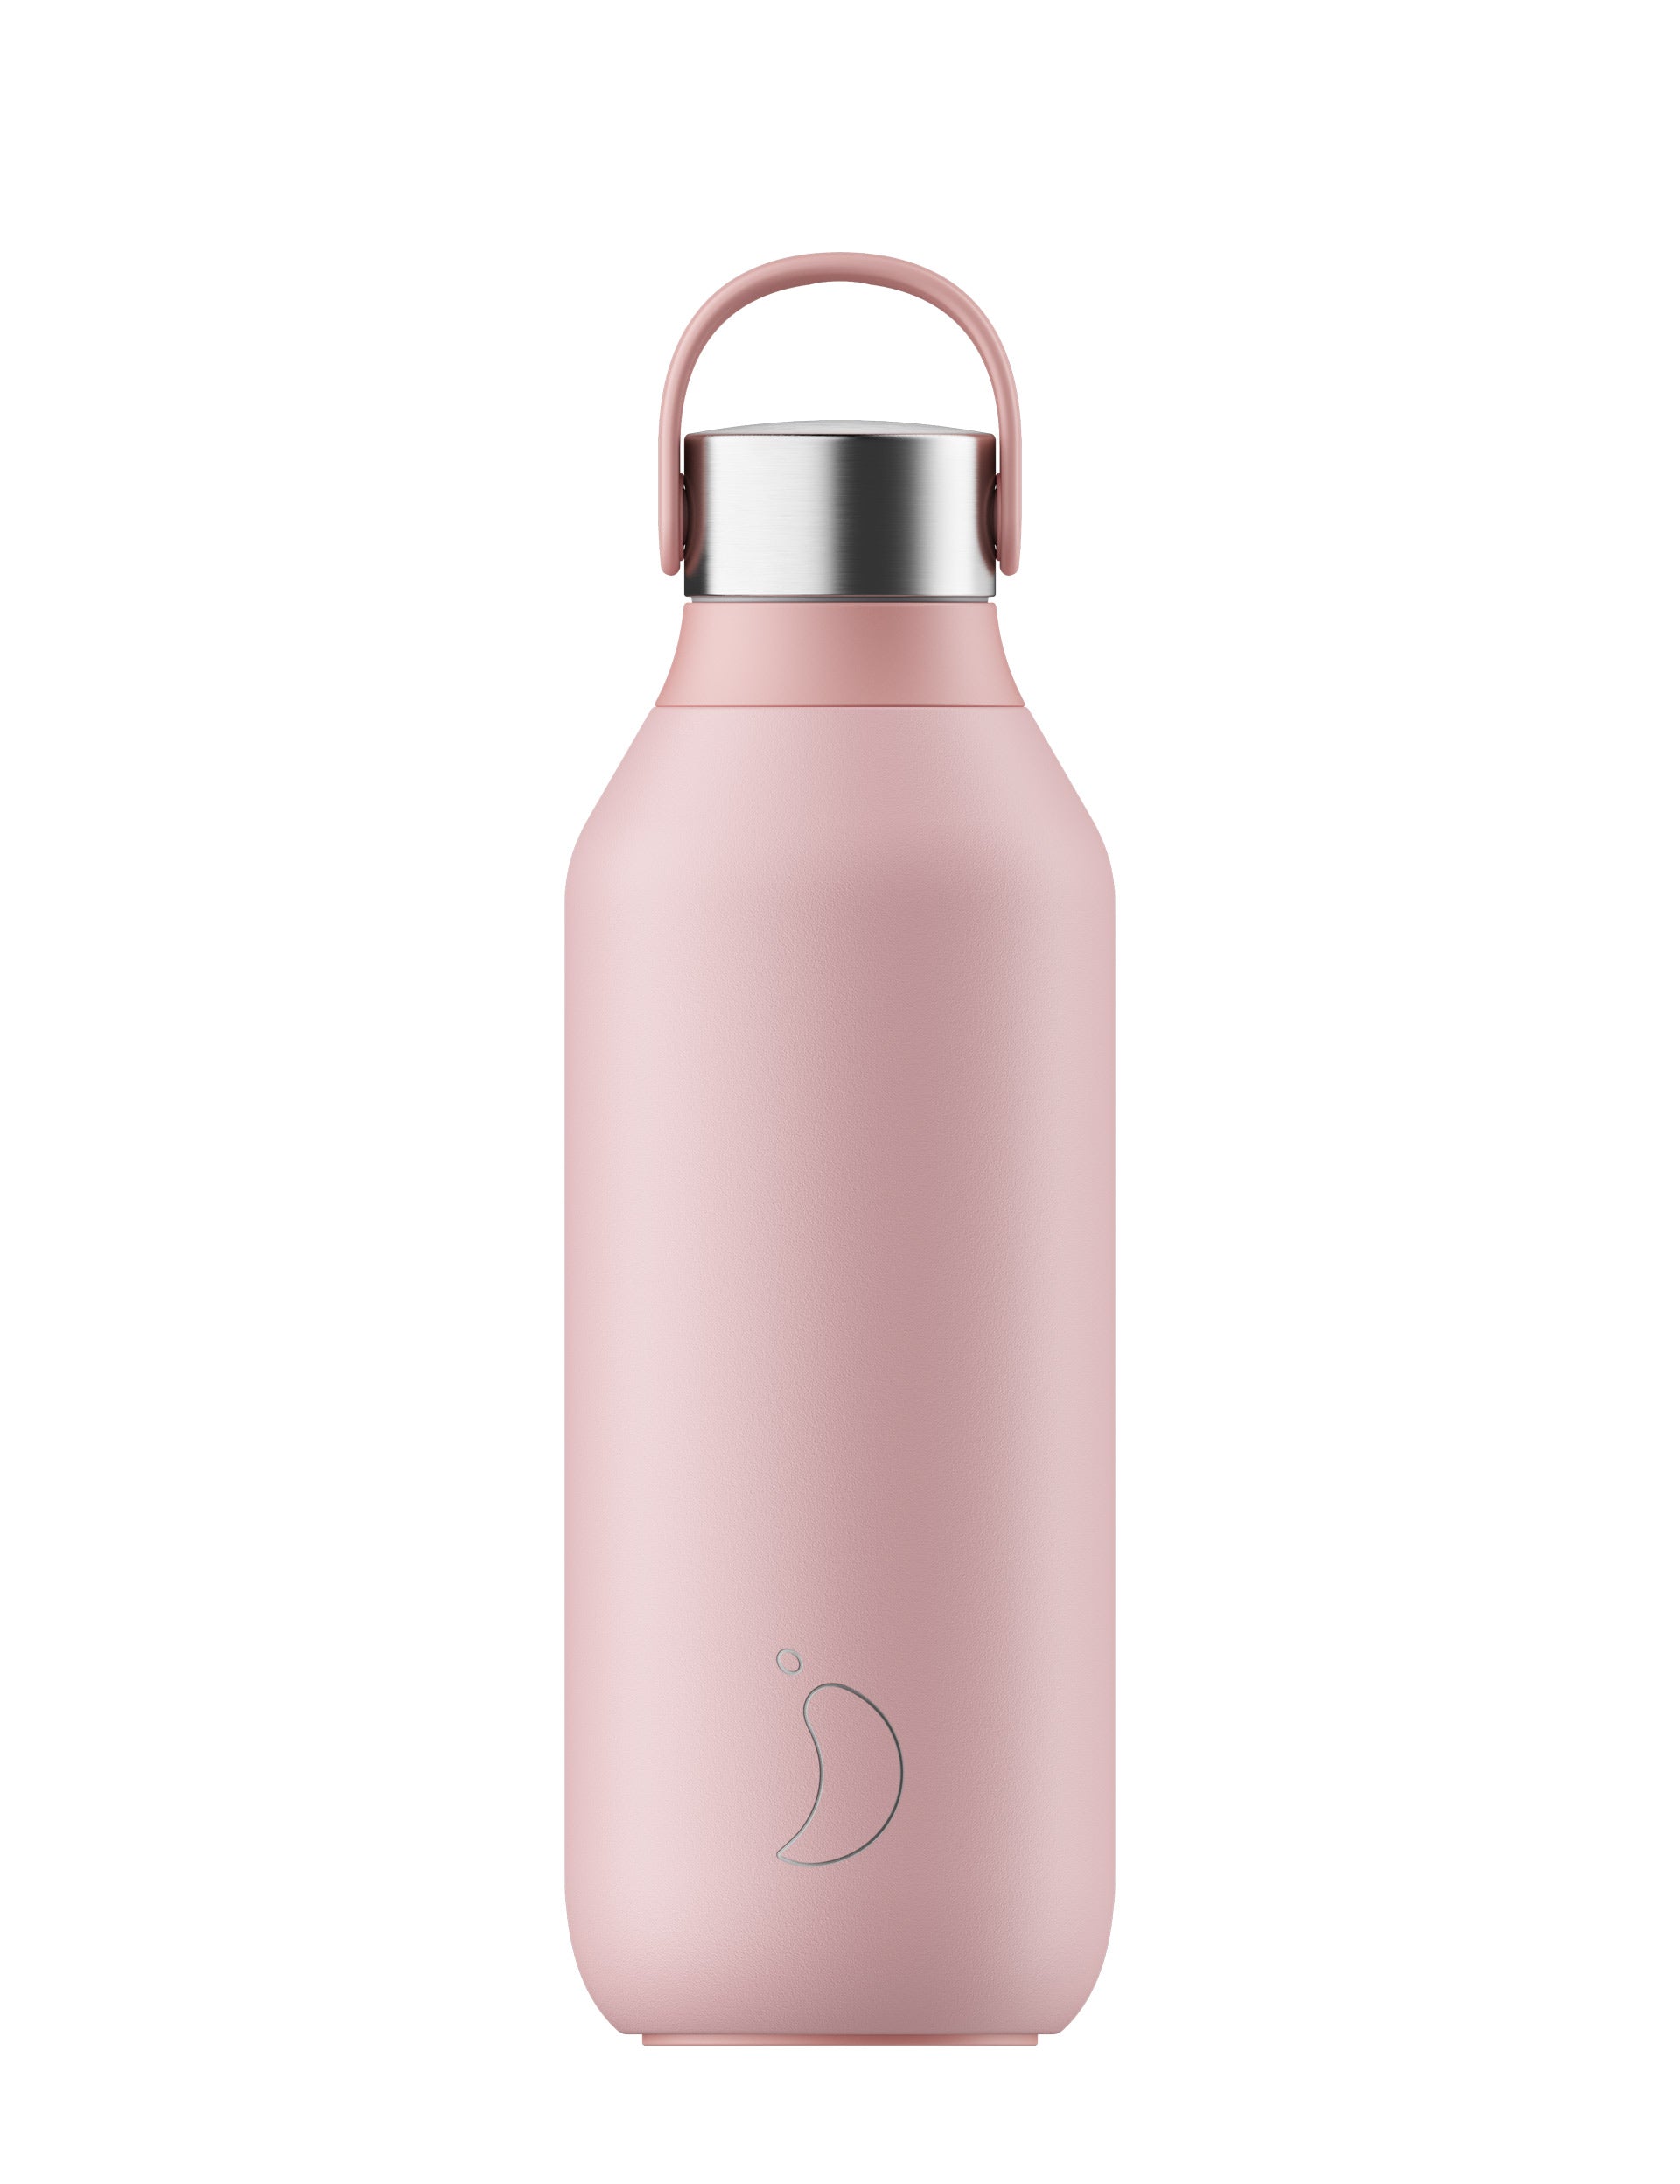 Chilly's Series 2 Insulated Leak-Proof Drinks Bottle, 500ml, Whale